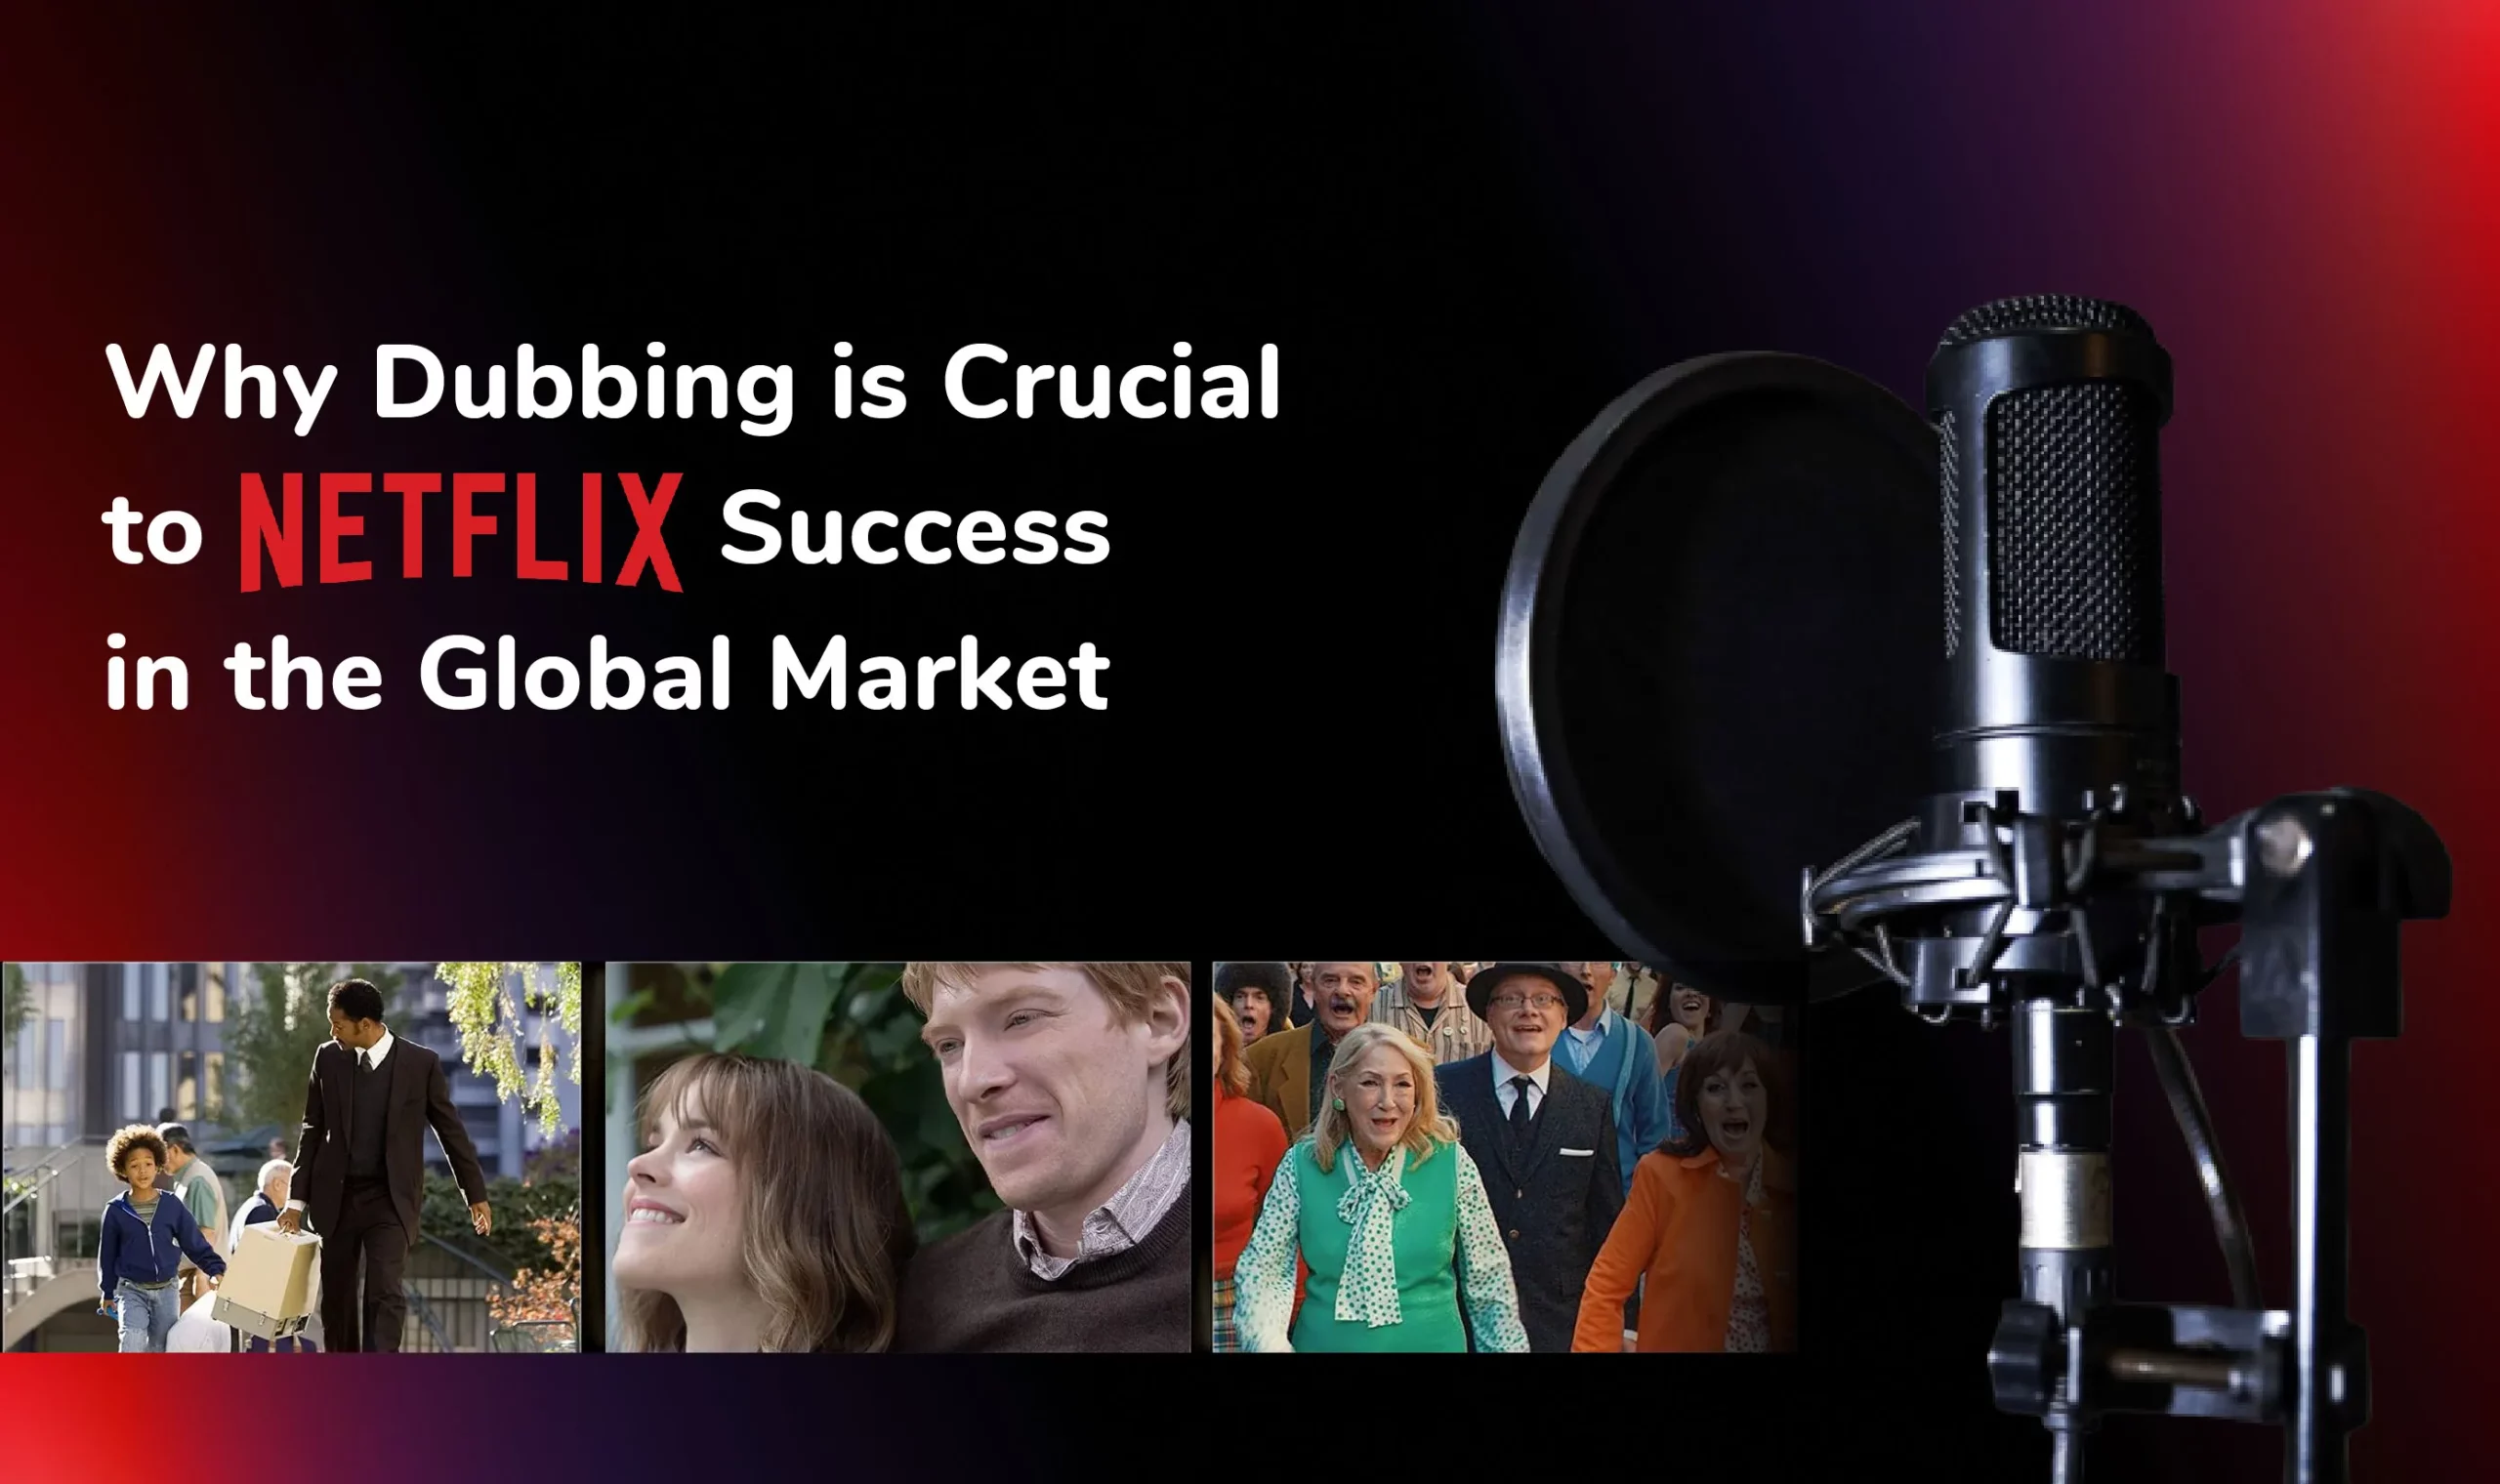 Why is Dubbing Crucial to Netflix’s Success in the Global Market?